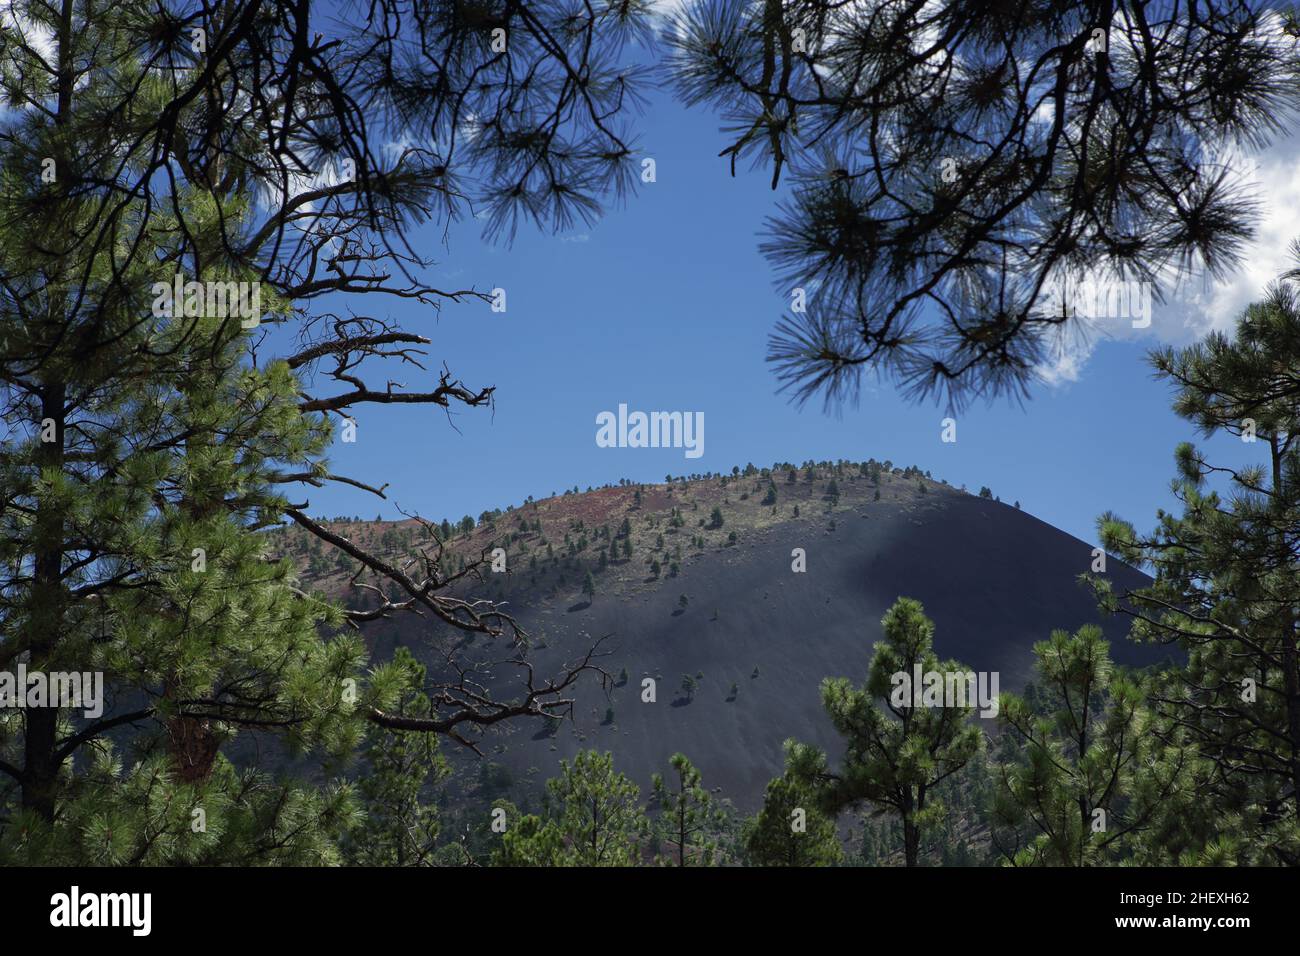 View of the top of Sunset Crater, a volcano cinder cone in the San Francisco Volcanic Field north of Flagstaff, AZ, framed by pine trees Stock Photo